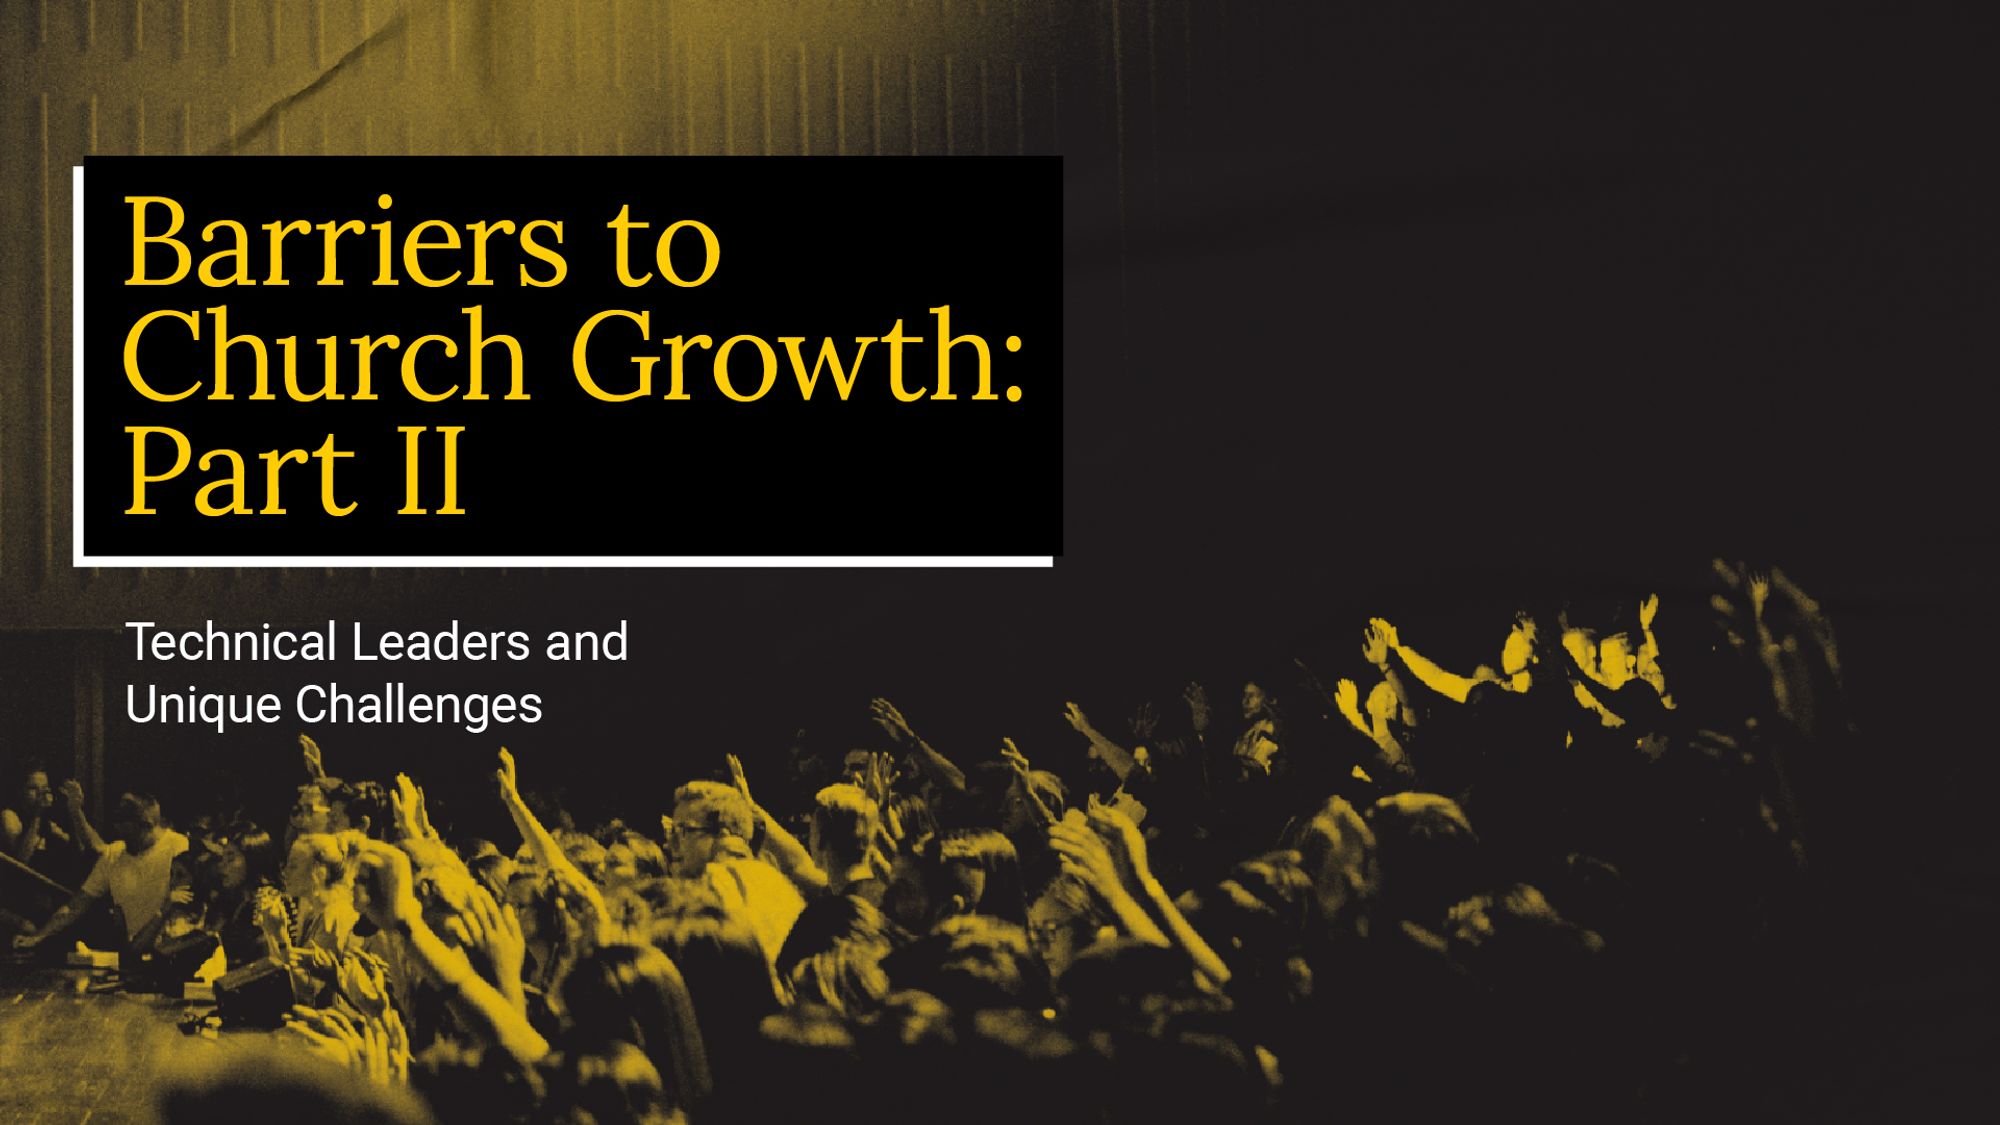 Barriers To Church Growth - Technical Leaders + Unique Challenges